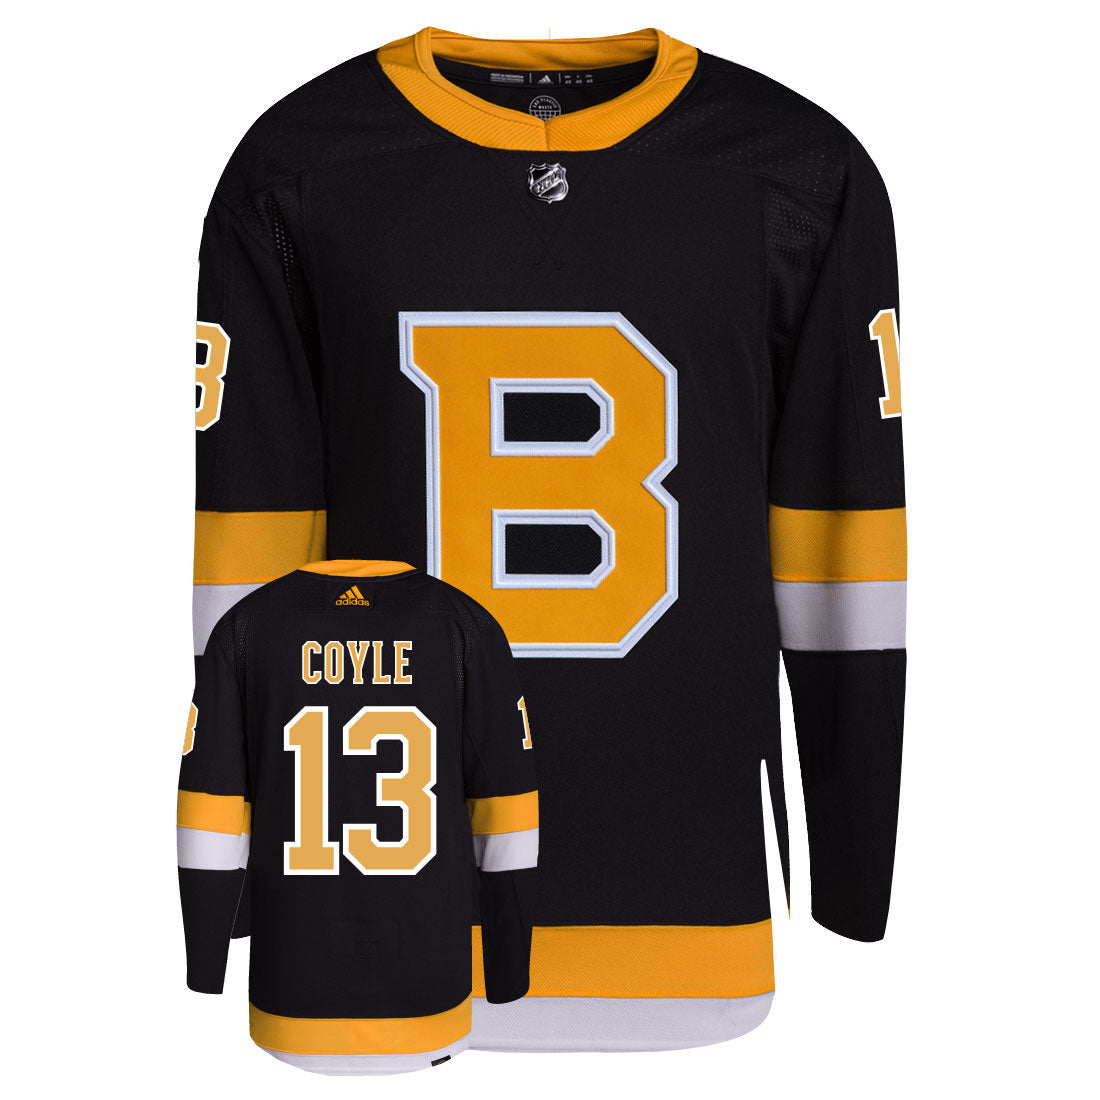 Charlie Coyle Boston Bruins Adidas Primegreen Authentic Third Alternate NHL Hockey Jersey - Front/Back View